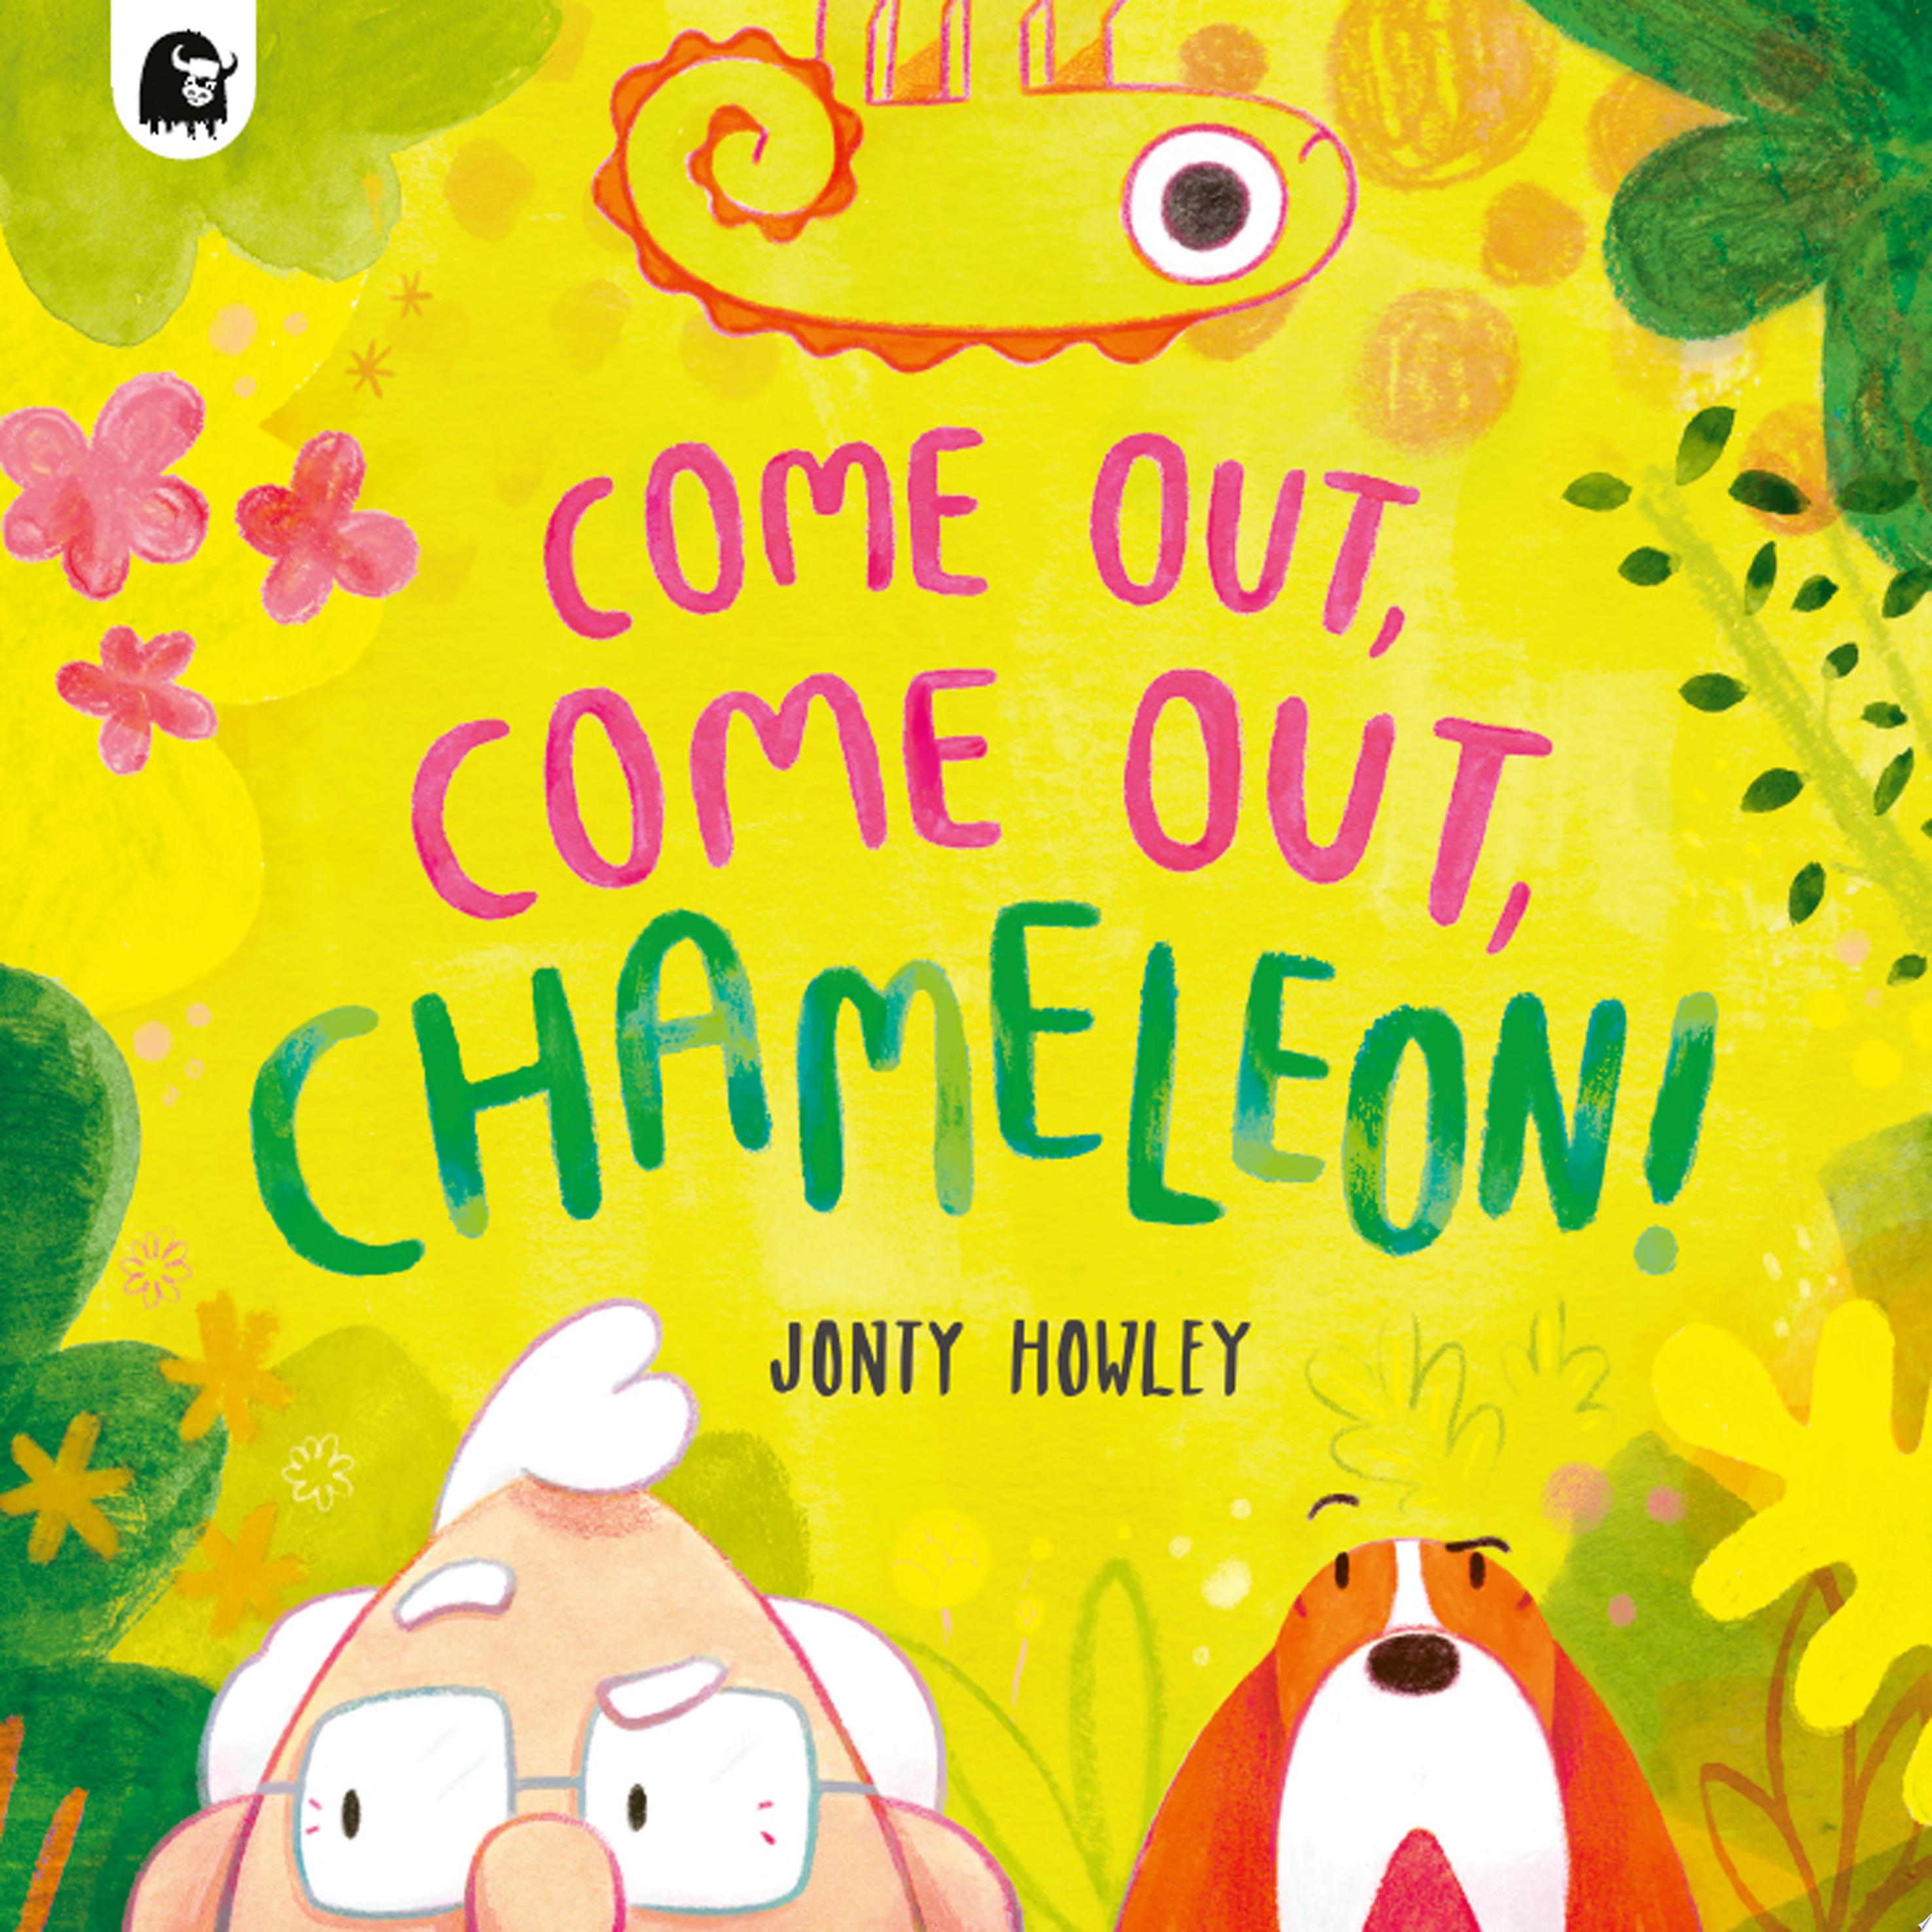 Image for "COME OUT, COME OUT, CHAMELEON!"